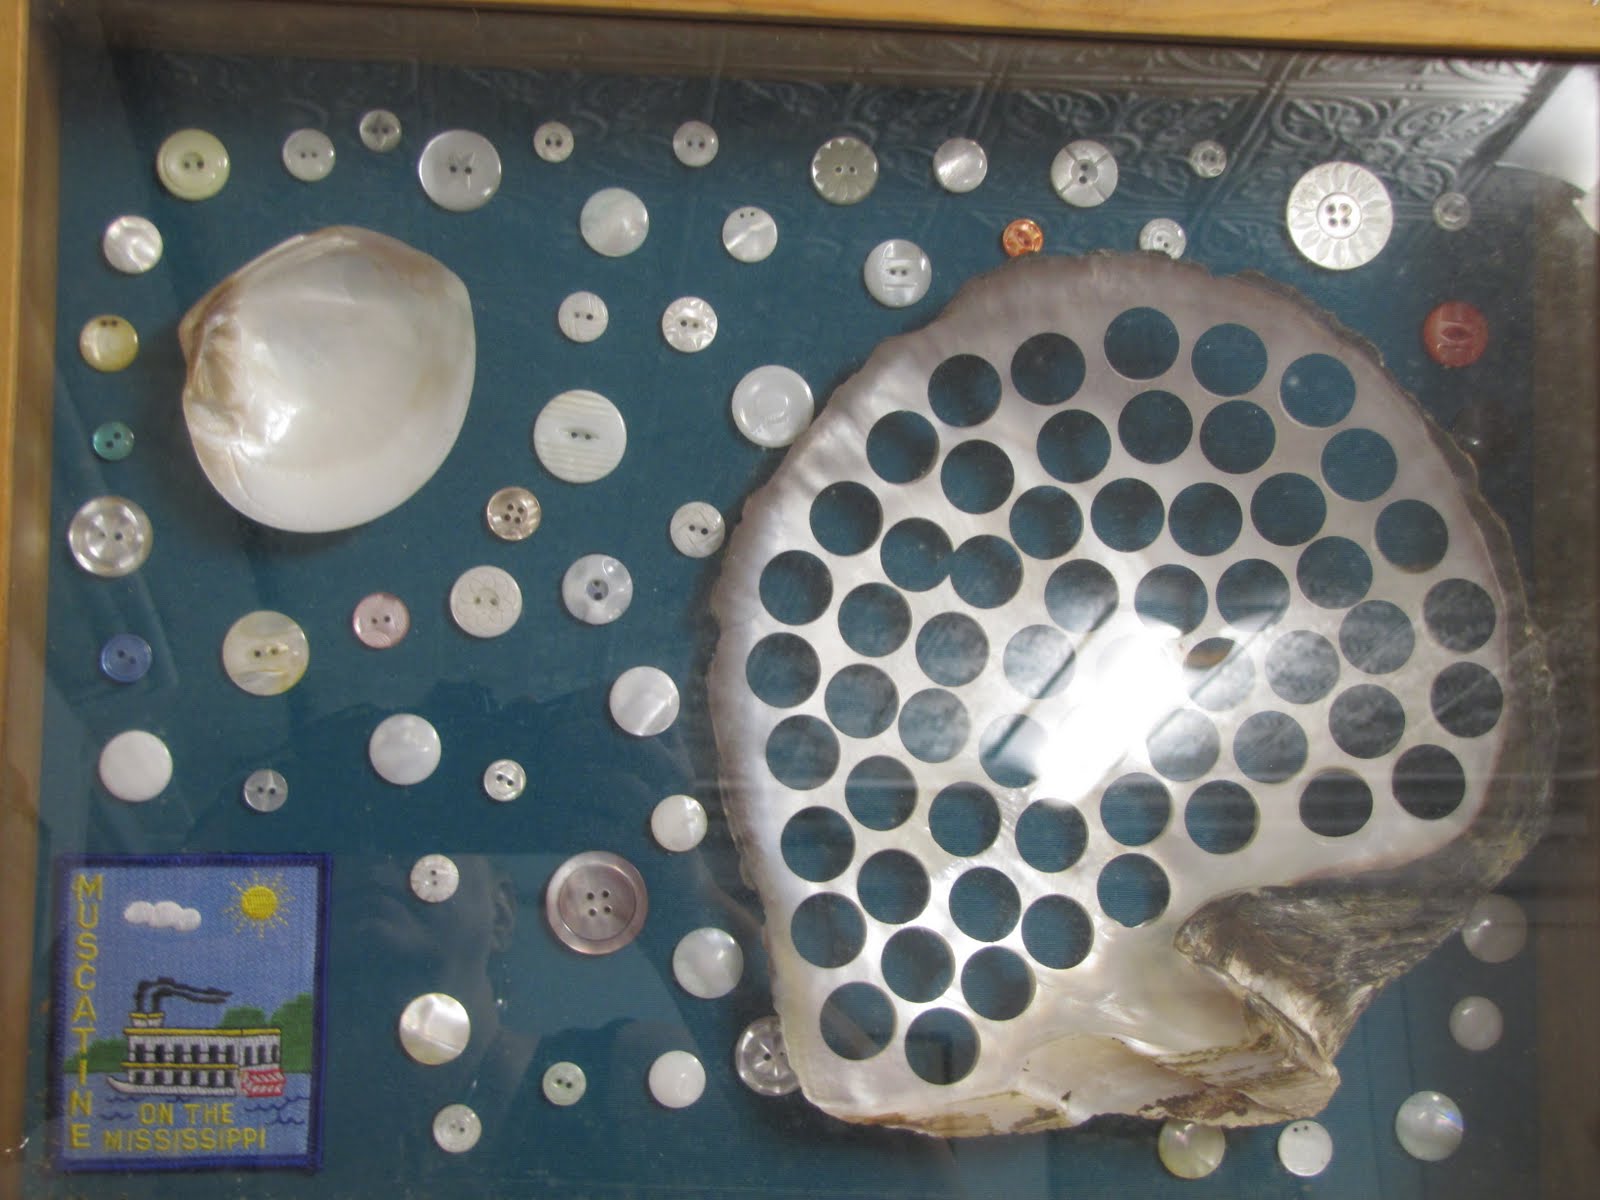 Vintage Connections: The Pearl Button Museum - Muscatine, Iowa